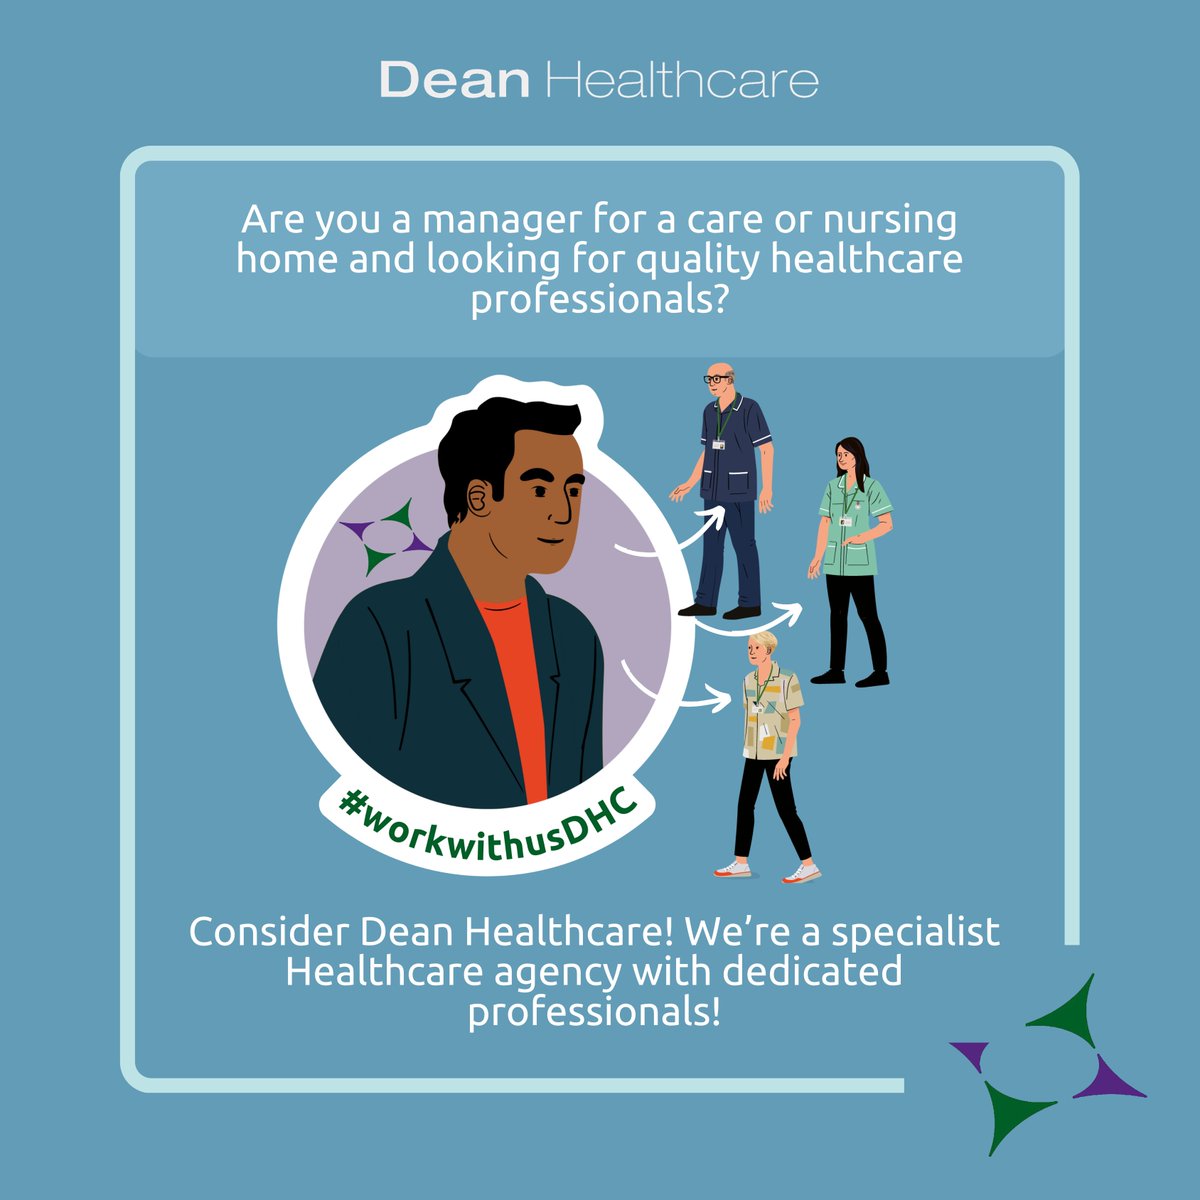 Are you a manager for a care or nursing home and looking for quality healthcare professionals? Consider Dean Healthcare! Contact us today for more information

#healthcare #HealthcareHeroes #health #care #caremanager #carehome #nursinghome #nursing #healthcareprofessionals #job